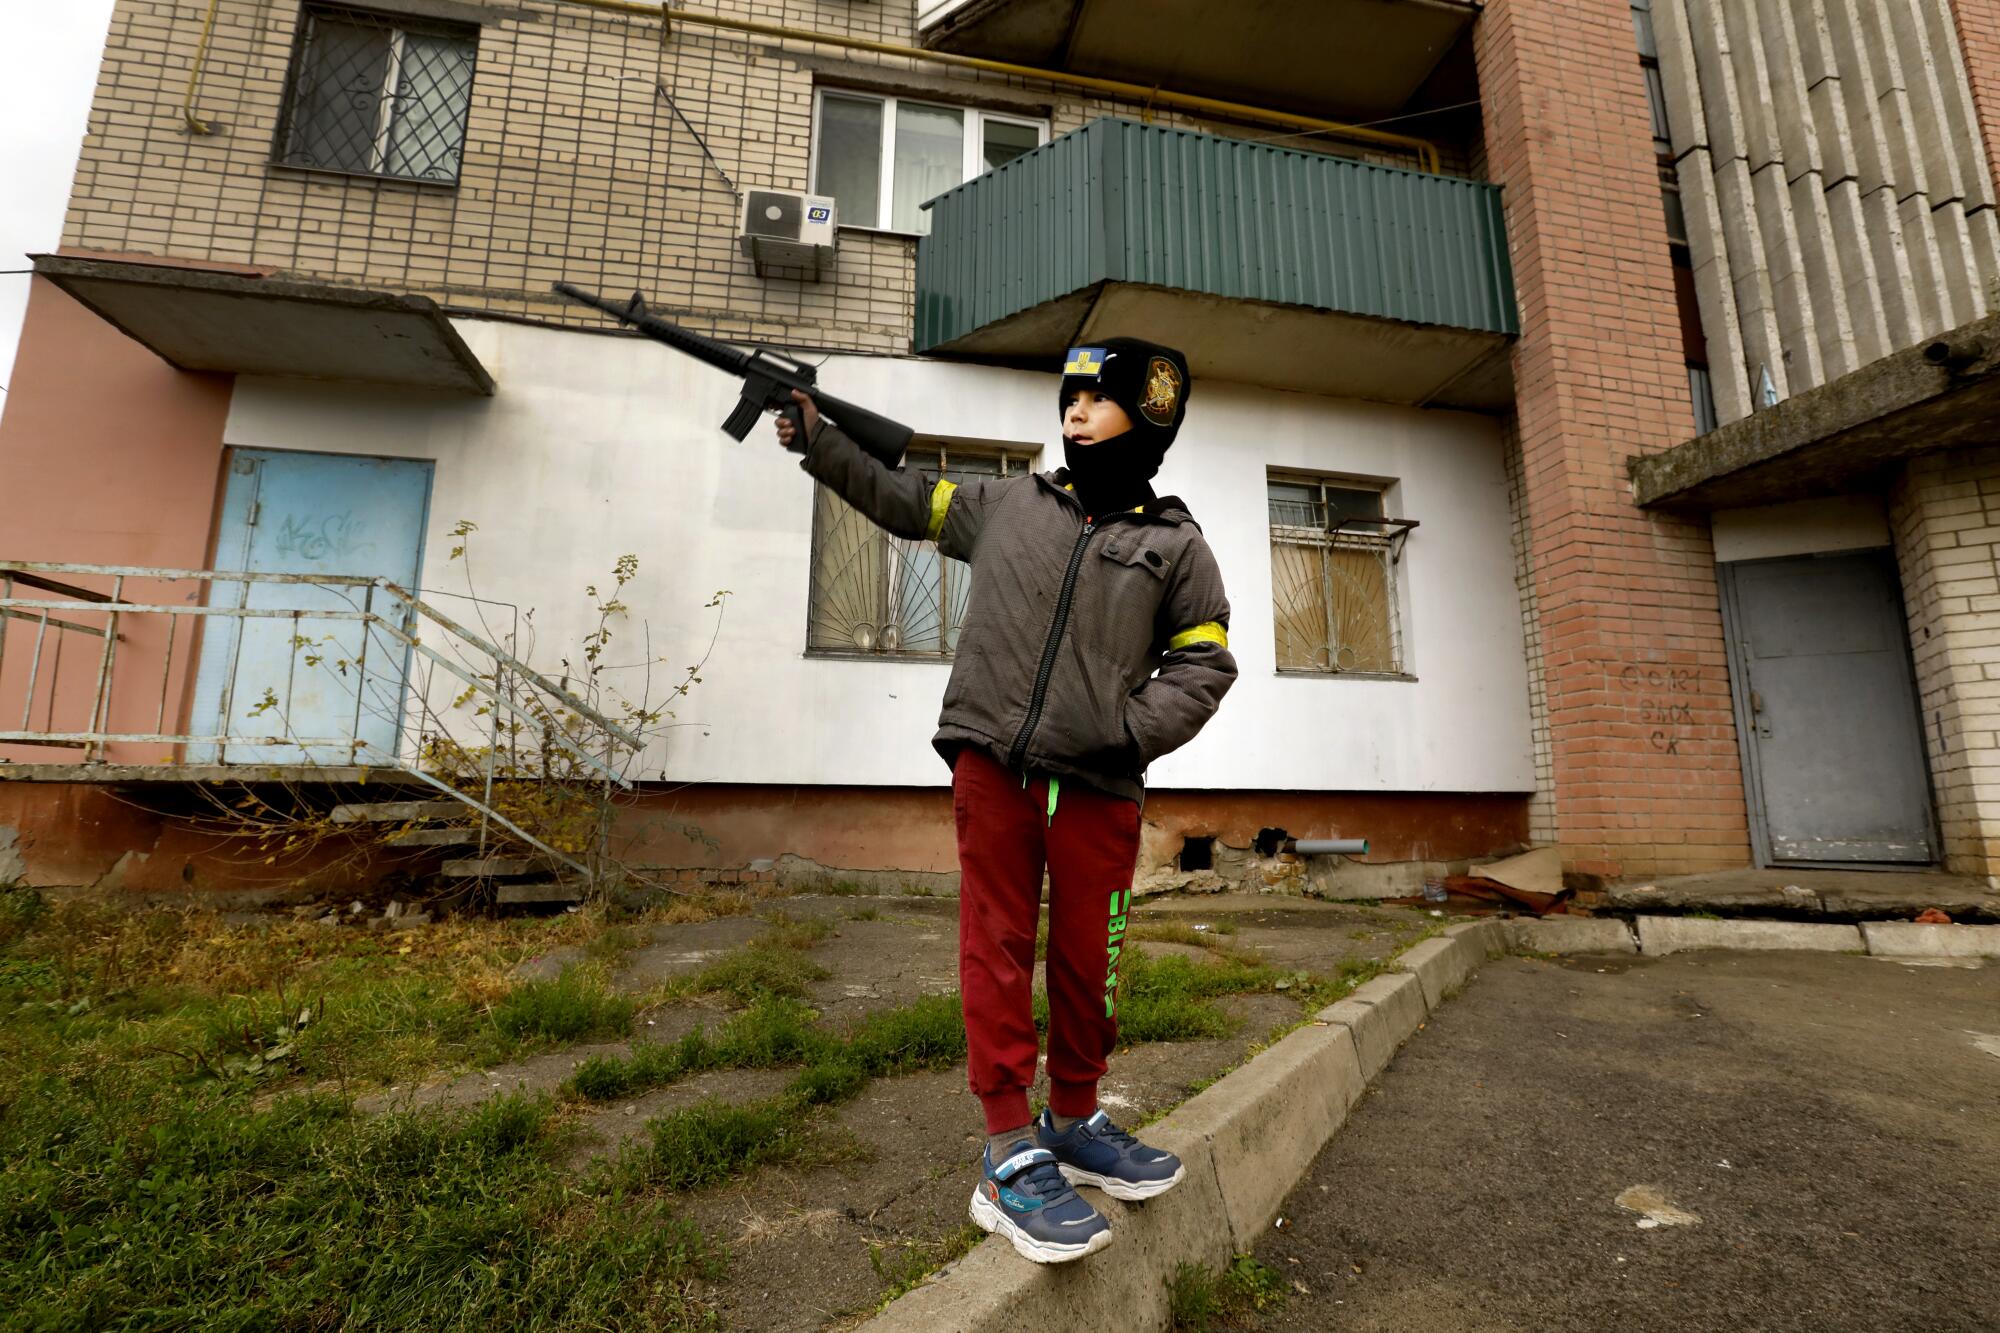 A boy in a dark cap, brown jacket and red pants brandishes a toy gun in front of a building